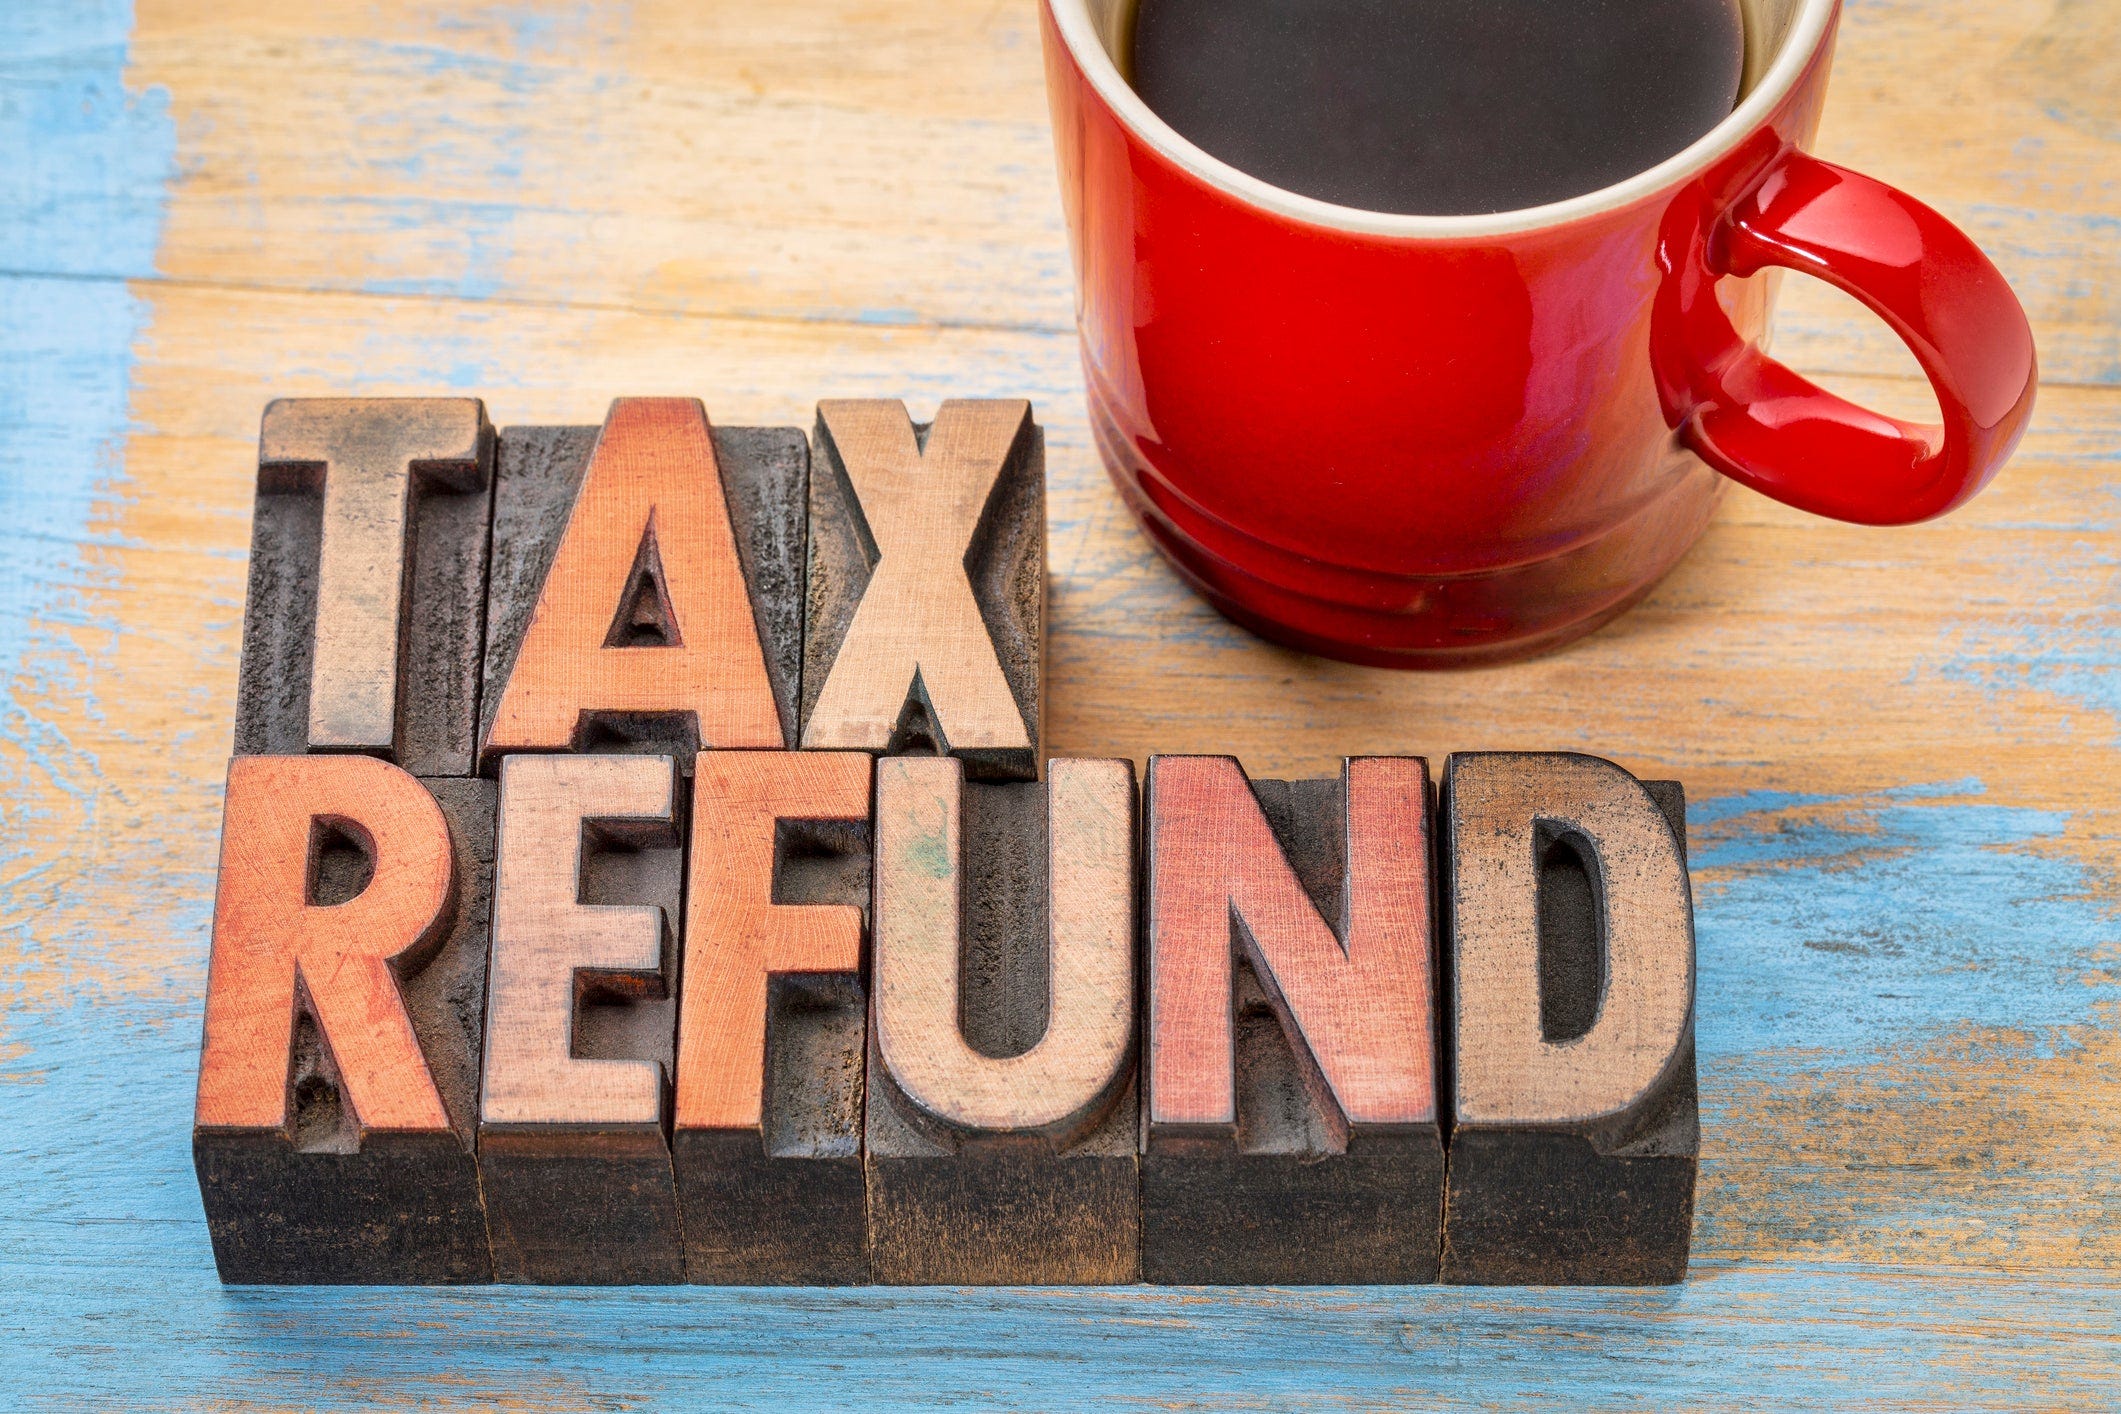 The words tax refund spelled out in block letters next to a red mug